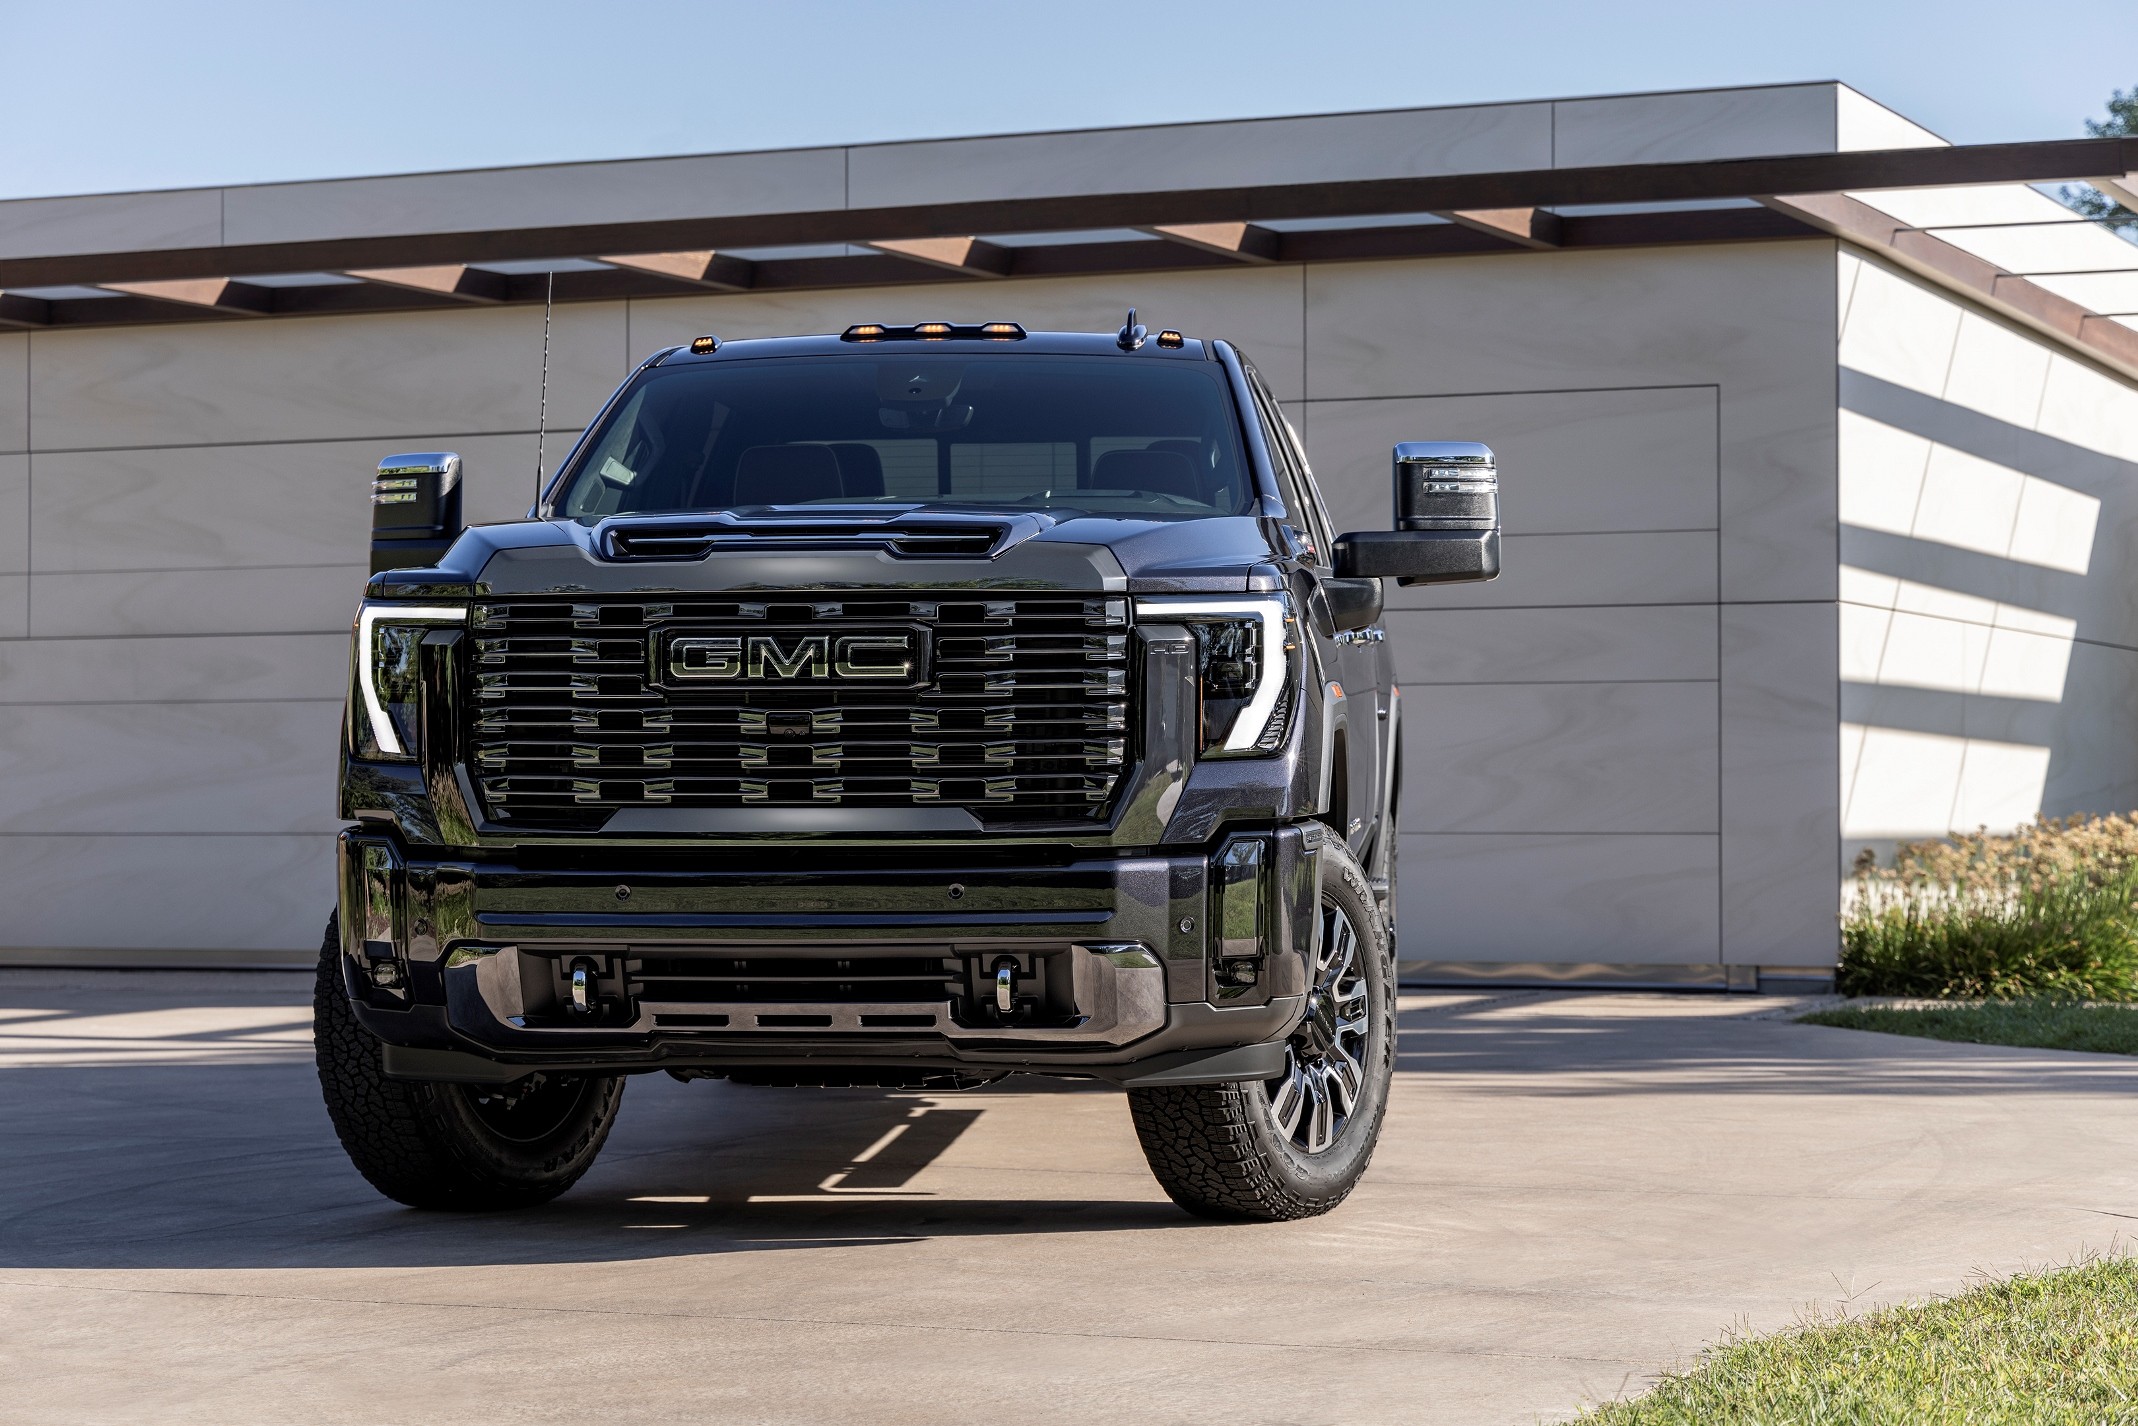 2024 Gmc Sierra Hd Lineup Welcomes Denali Ultimate At4x Off Road Trim Levels 12 